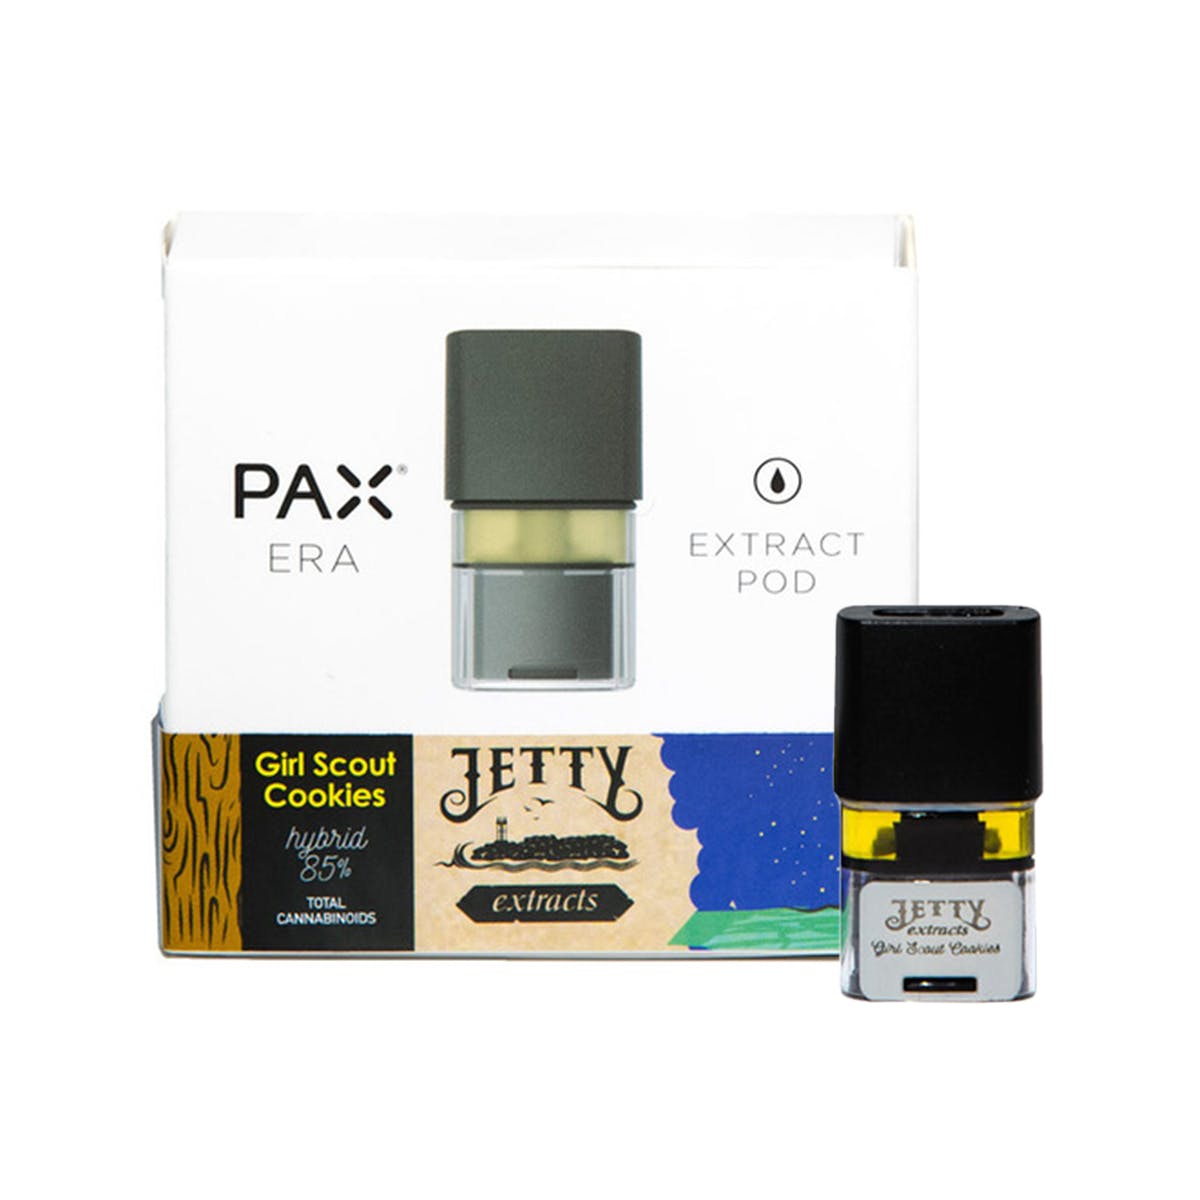 PAX Era Pod - Jetty Extracts Girl Scout Cookies